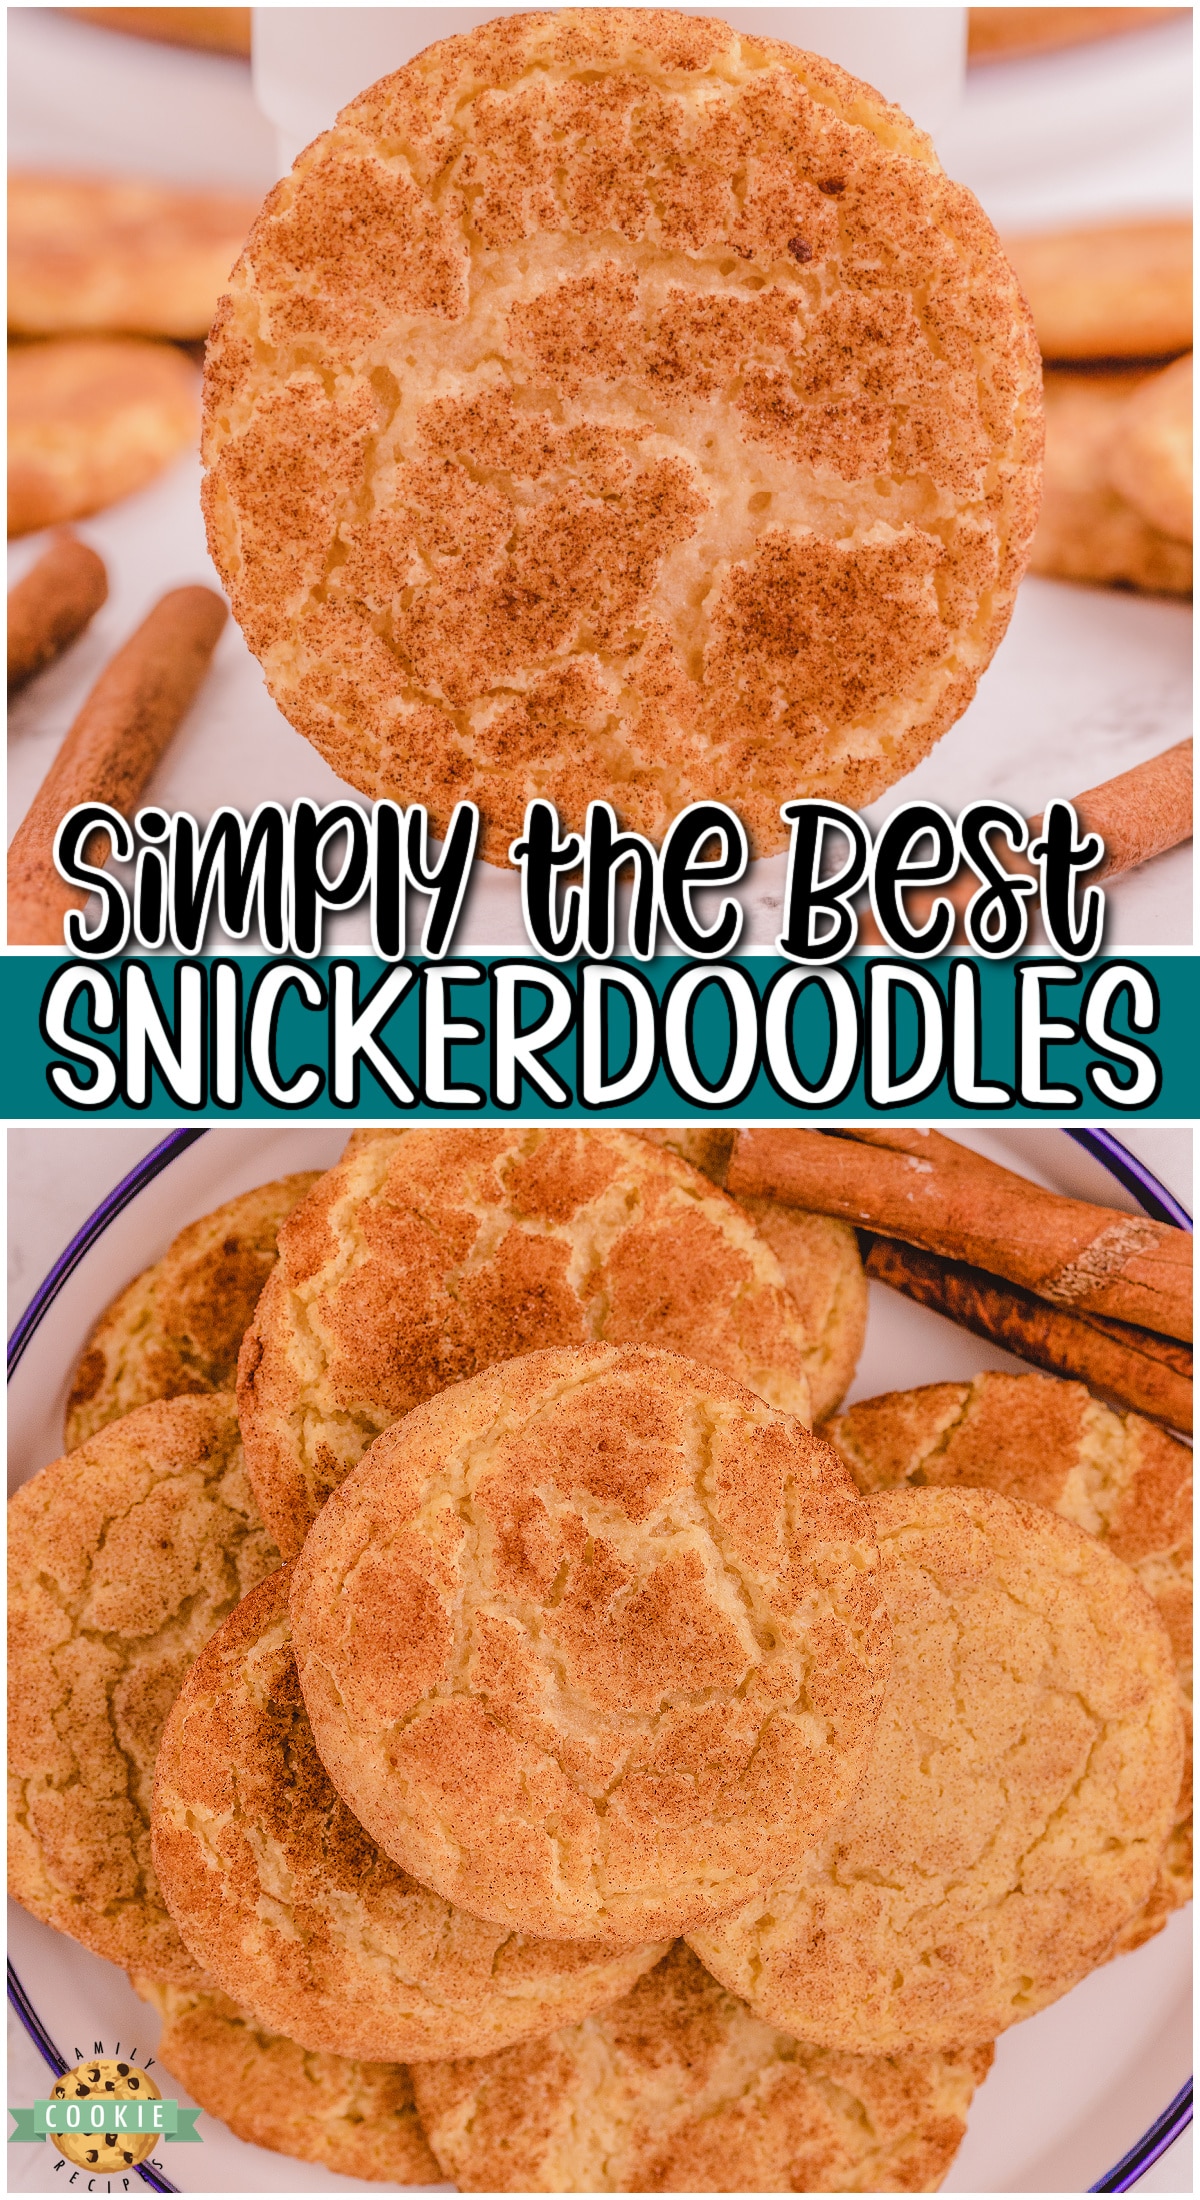 Best Snickerdoodle Recipe made with classic ingredients that yield soft, chewy cookies with that lovely cinnamon sugar taste we enjoy! Perfect Snickerdoodle cookies that everyone craves!